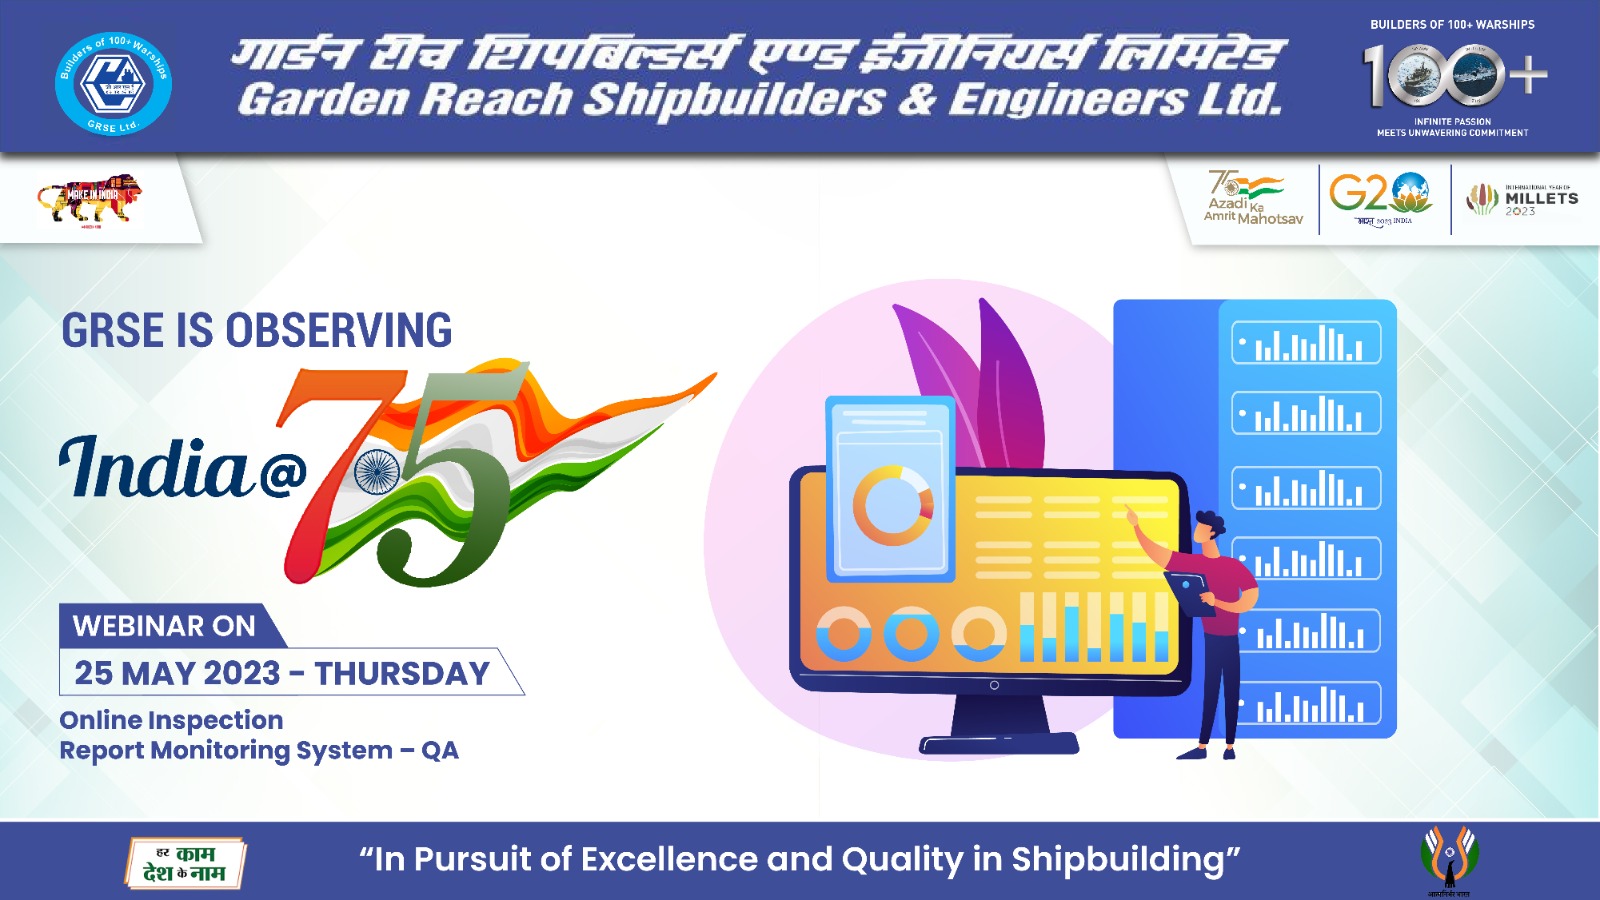 India@75 - Phase X Webinar on Online Inspection Report Monitoring System - QA on 25 May 23